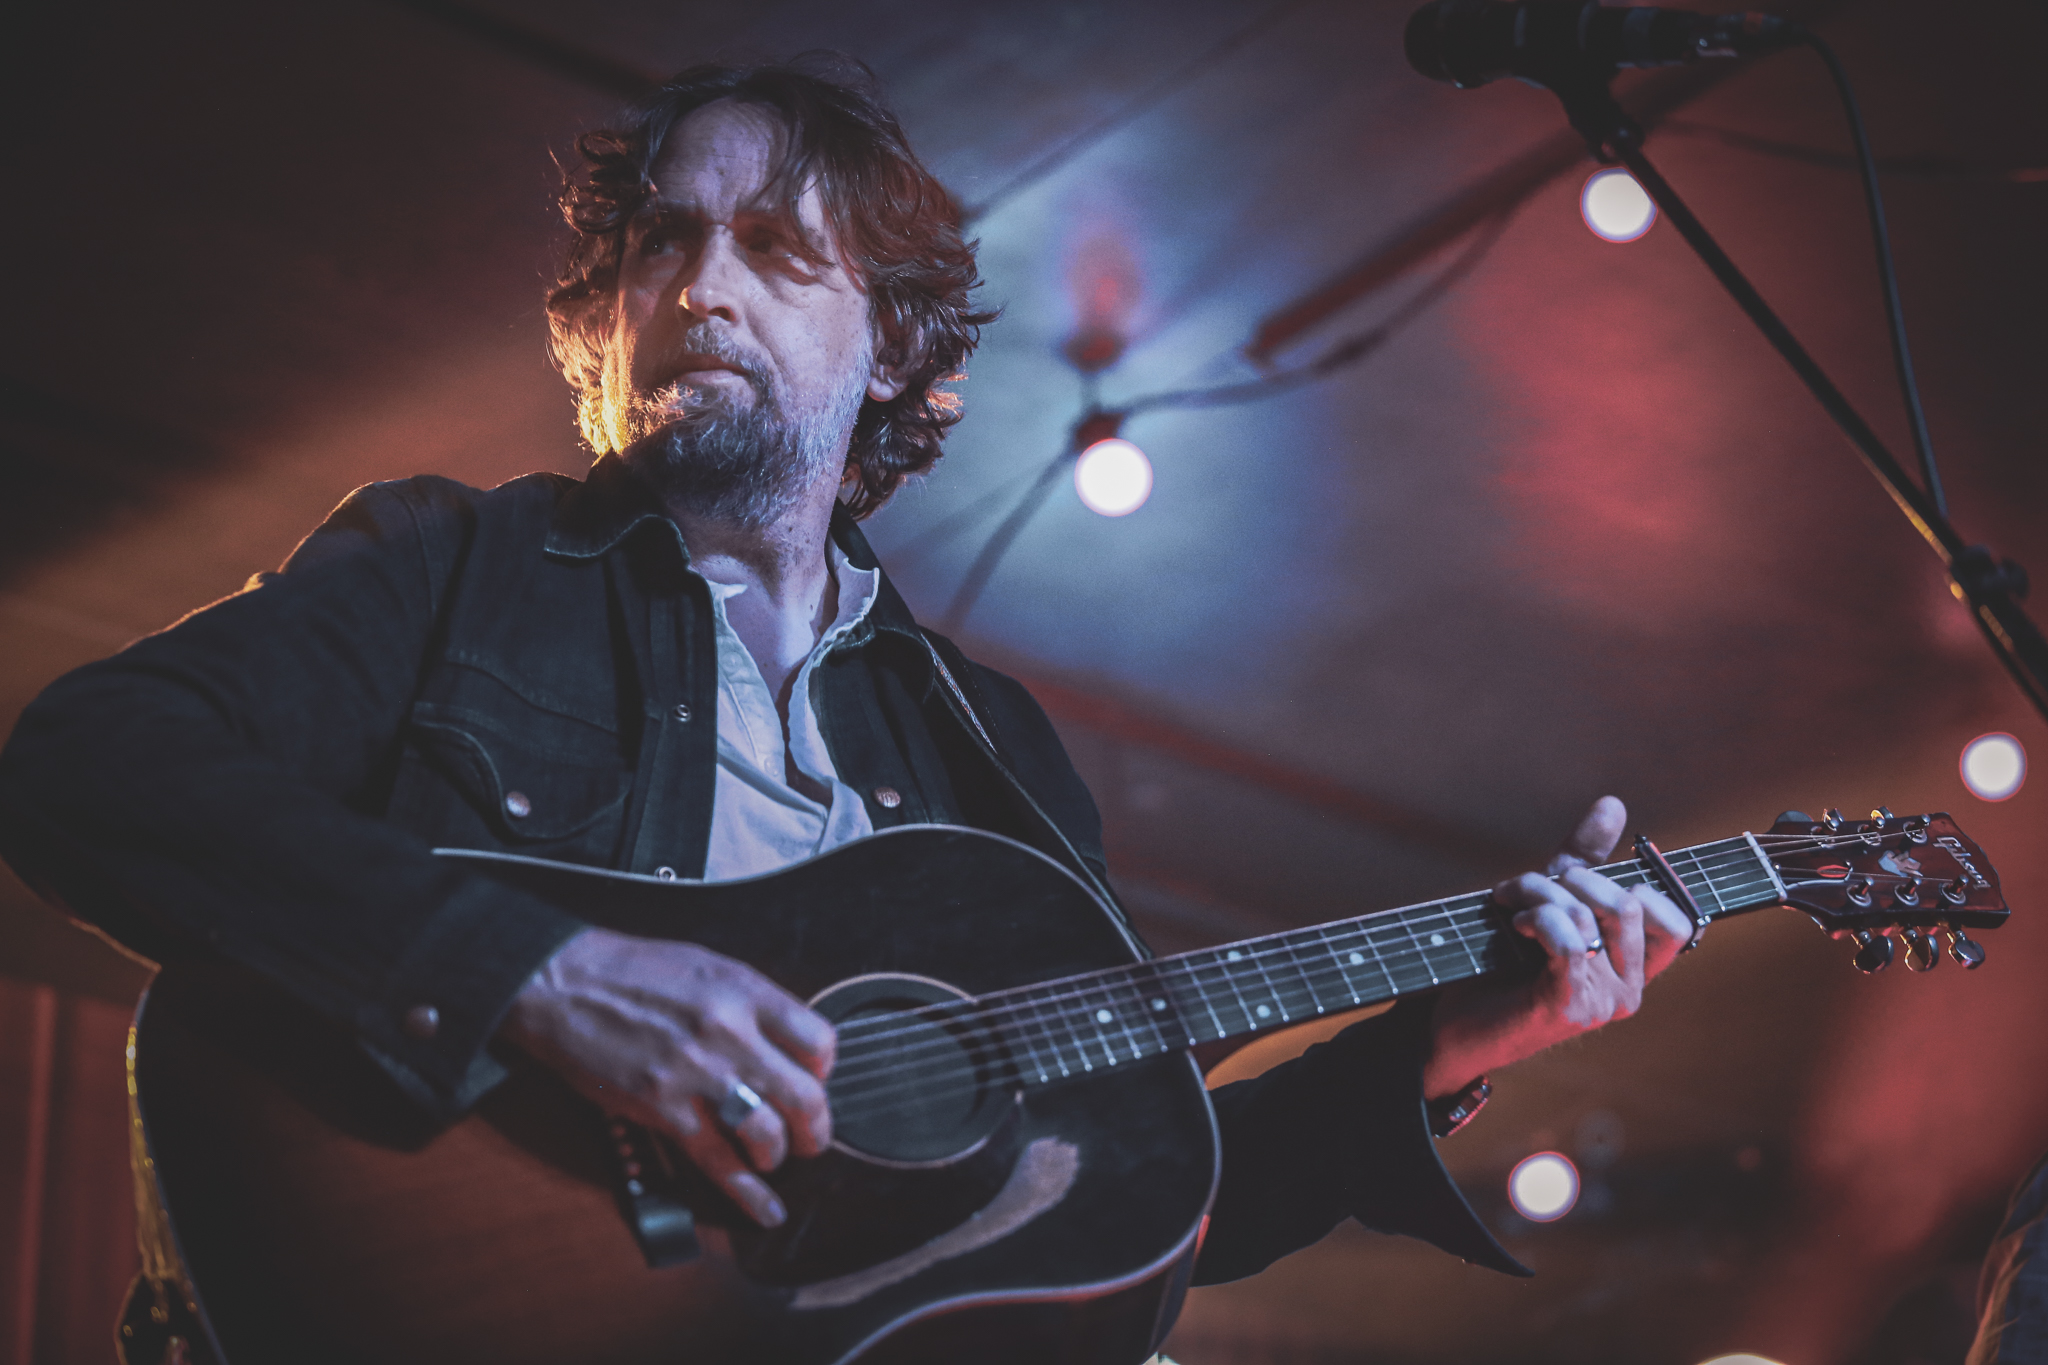 Hayes and the Heathens play a show in North Carolina, concert photography